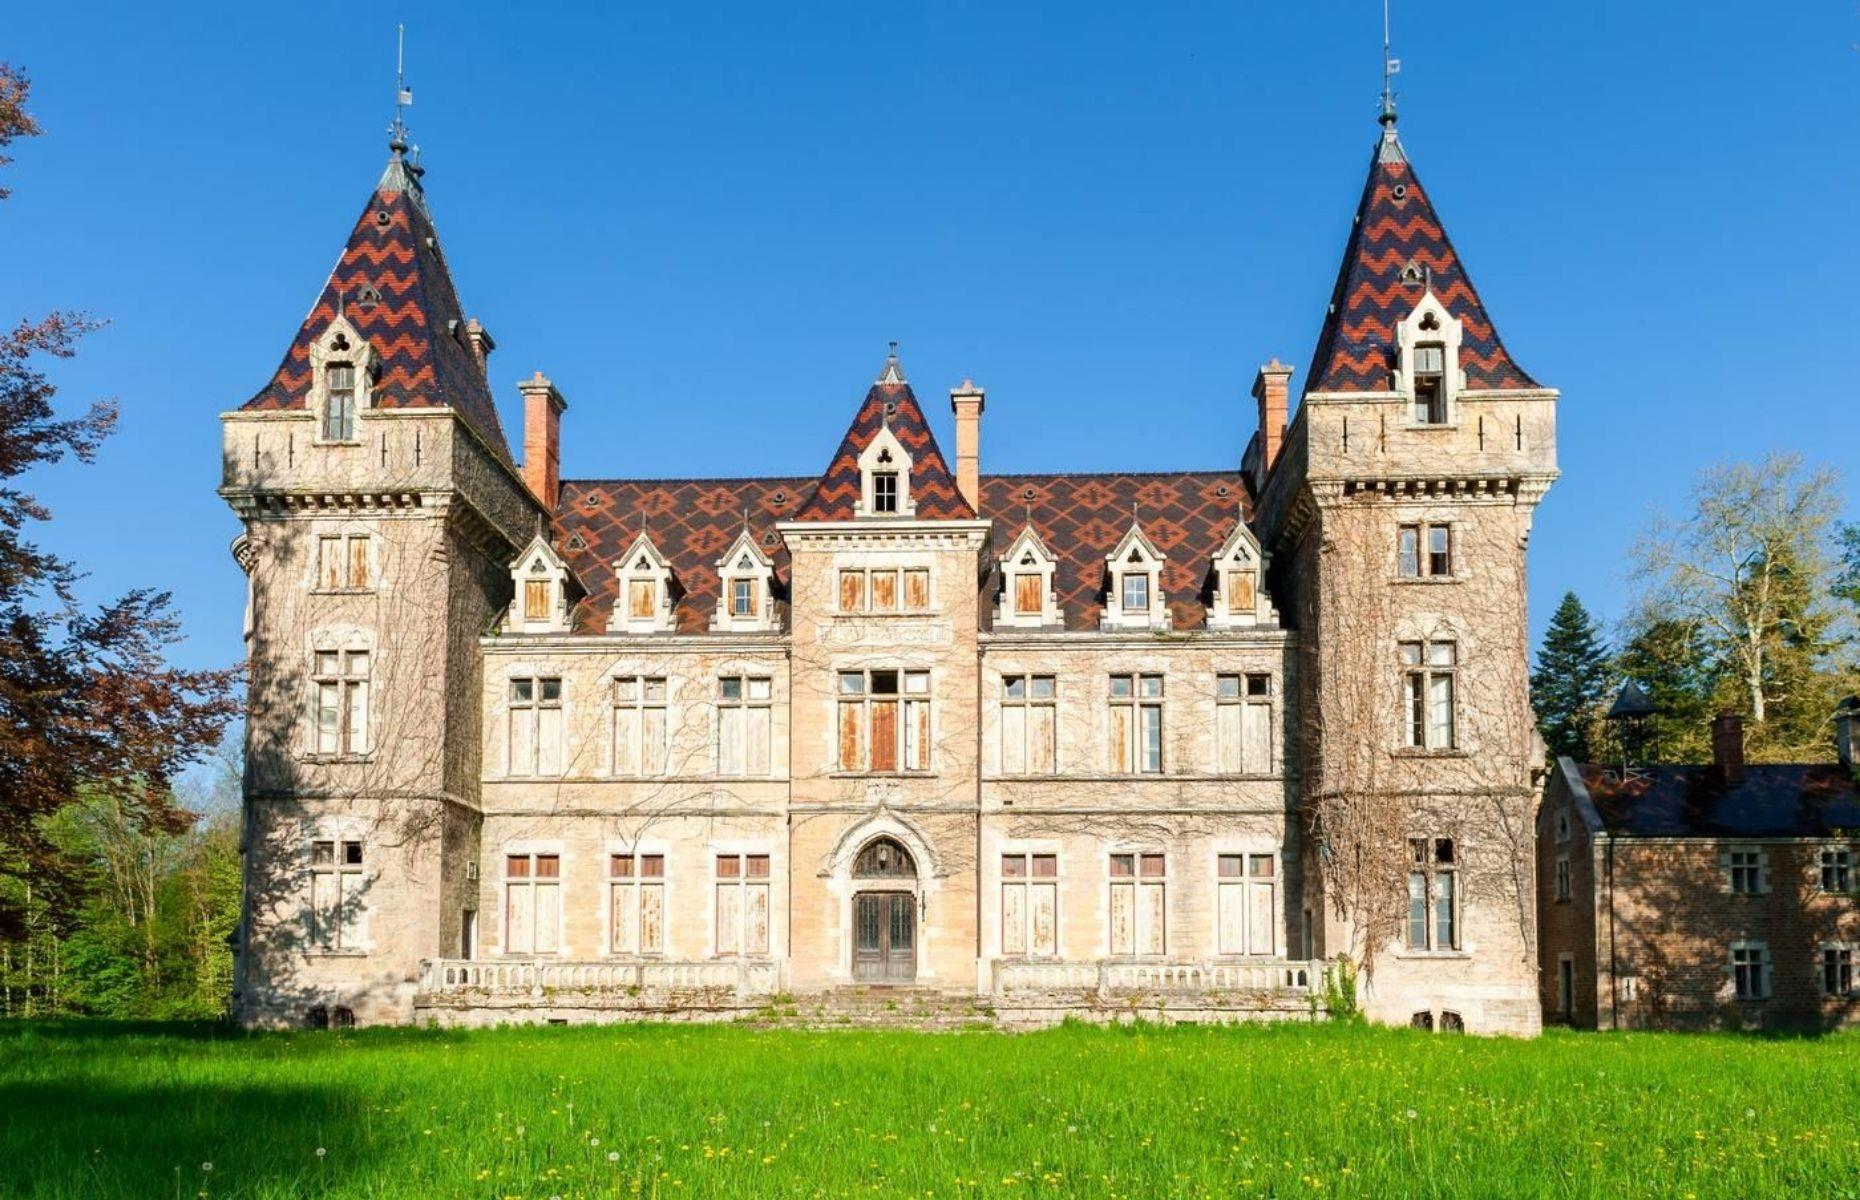 <p>Nestled on 580 stunning acres of land in the heart of Burgundy, France, this estate dates back to the 11th century but fell to ruins in 1781. Rebuilt in the 19th century, the chateau and its surroundings have now been declared a historical monument and were <a href="http://www.christiesrealestate.com/sales/detail/170-l-78145-f1905231902700037/burgundy-235-ha-with-chateau-and-golf-macon-so-71000">put on the market</a> in 2020. </p>